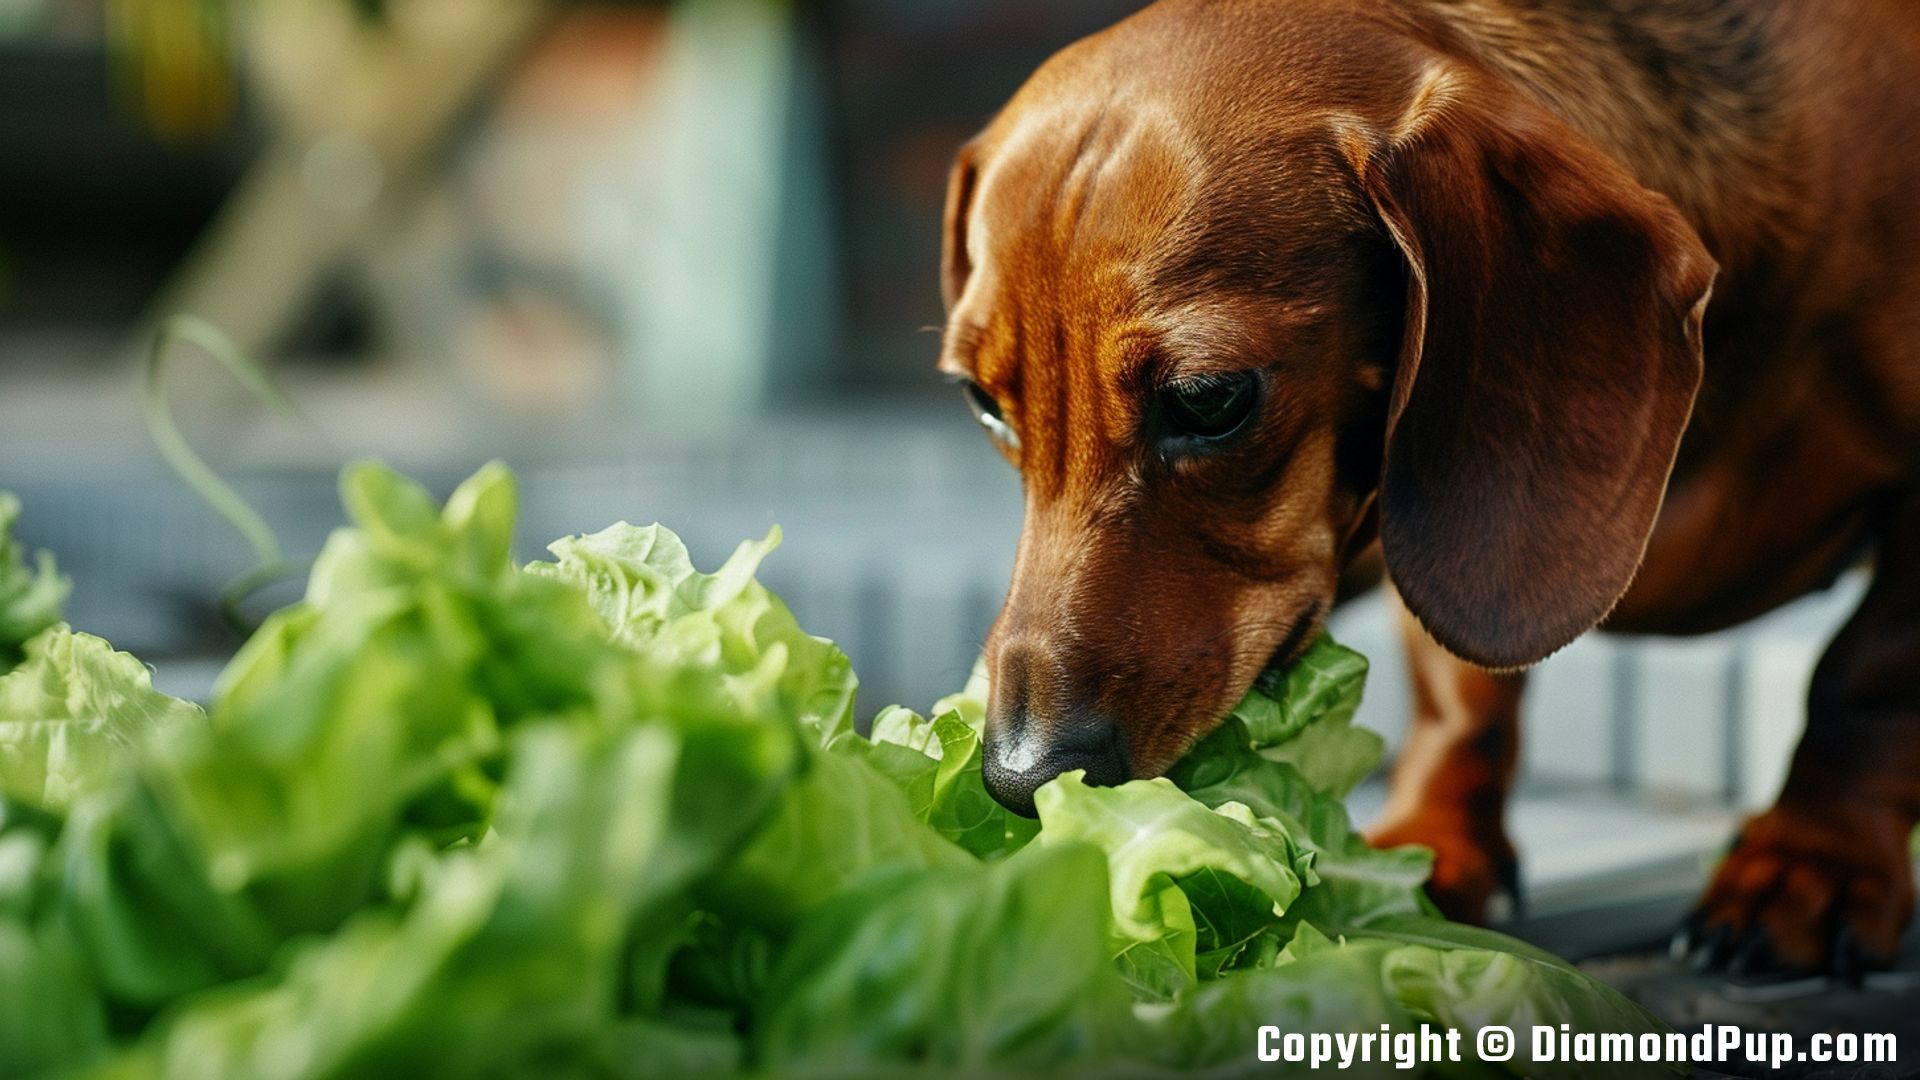 Image of an Adorable Dachshund Snacking on Lettuce